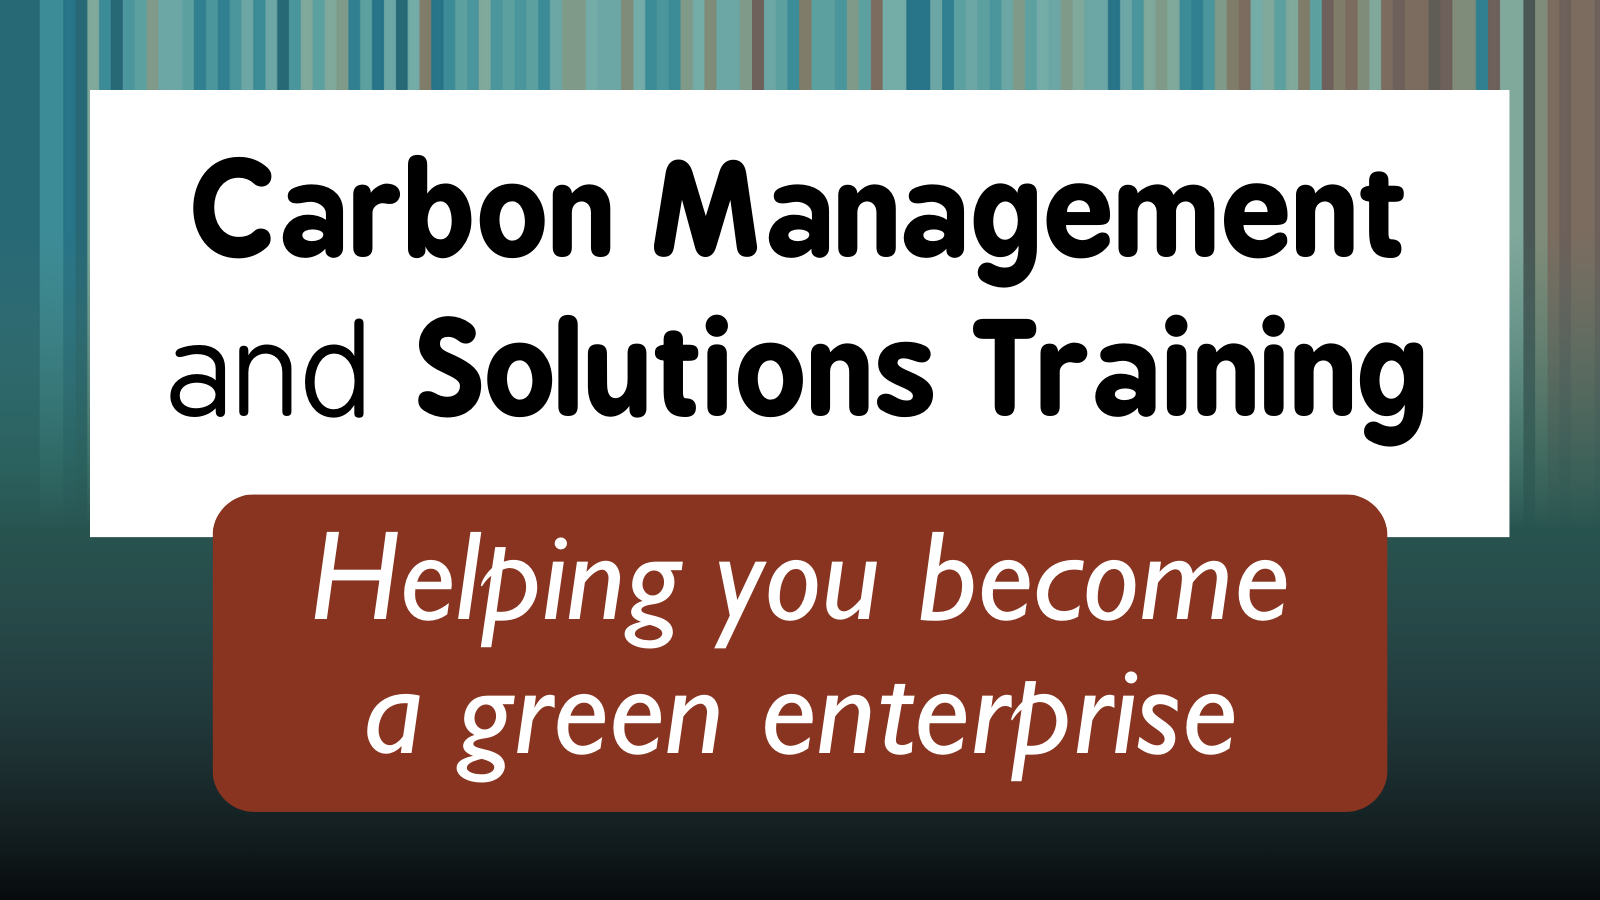 Carbon Management and Solutions Training